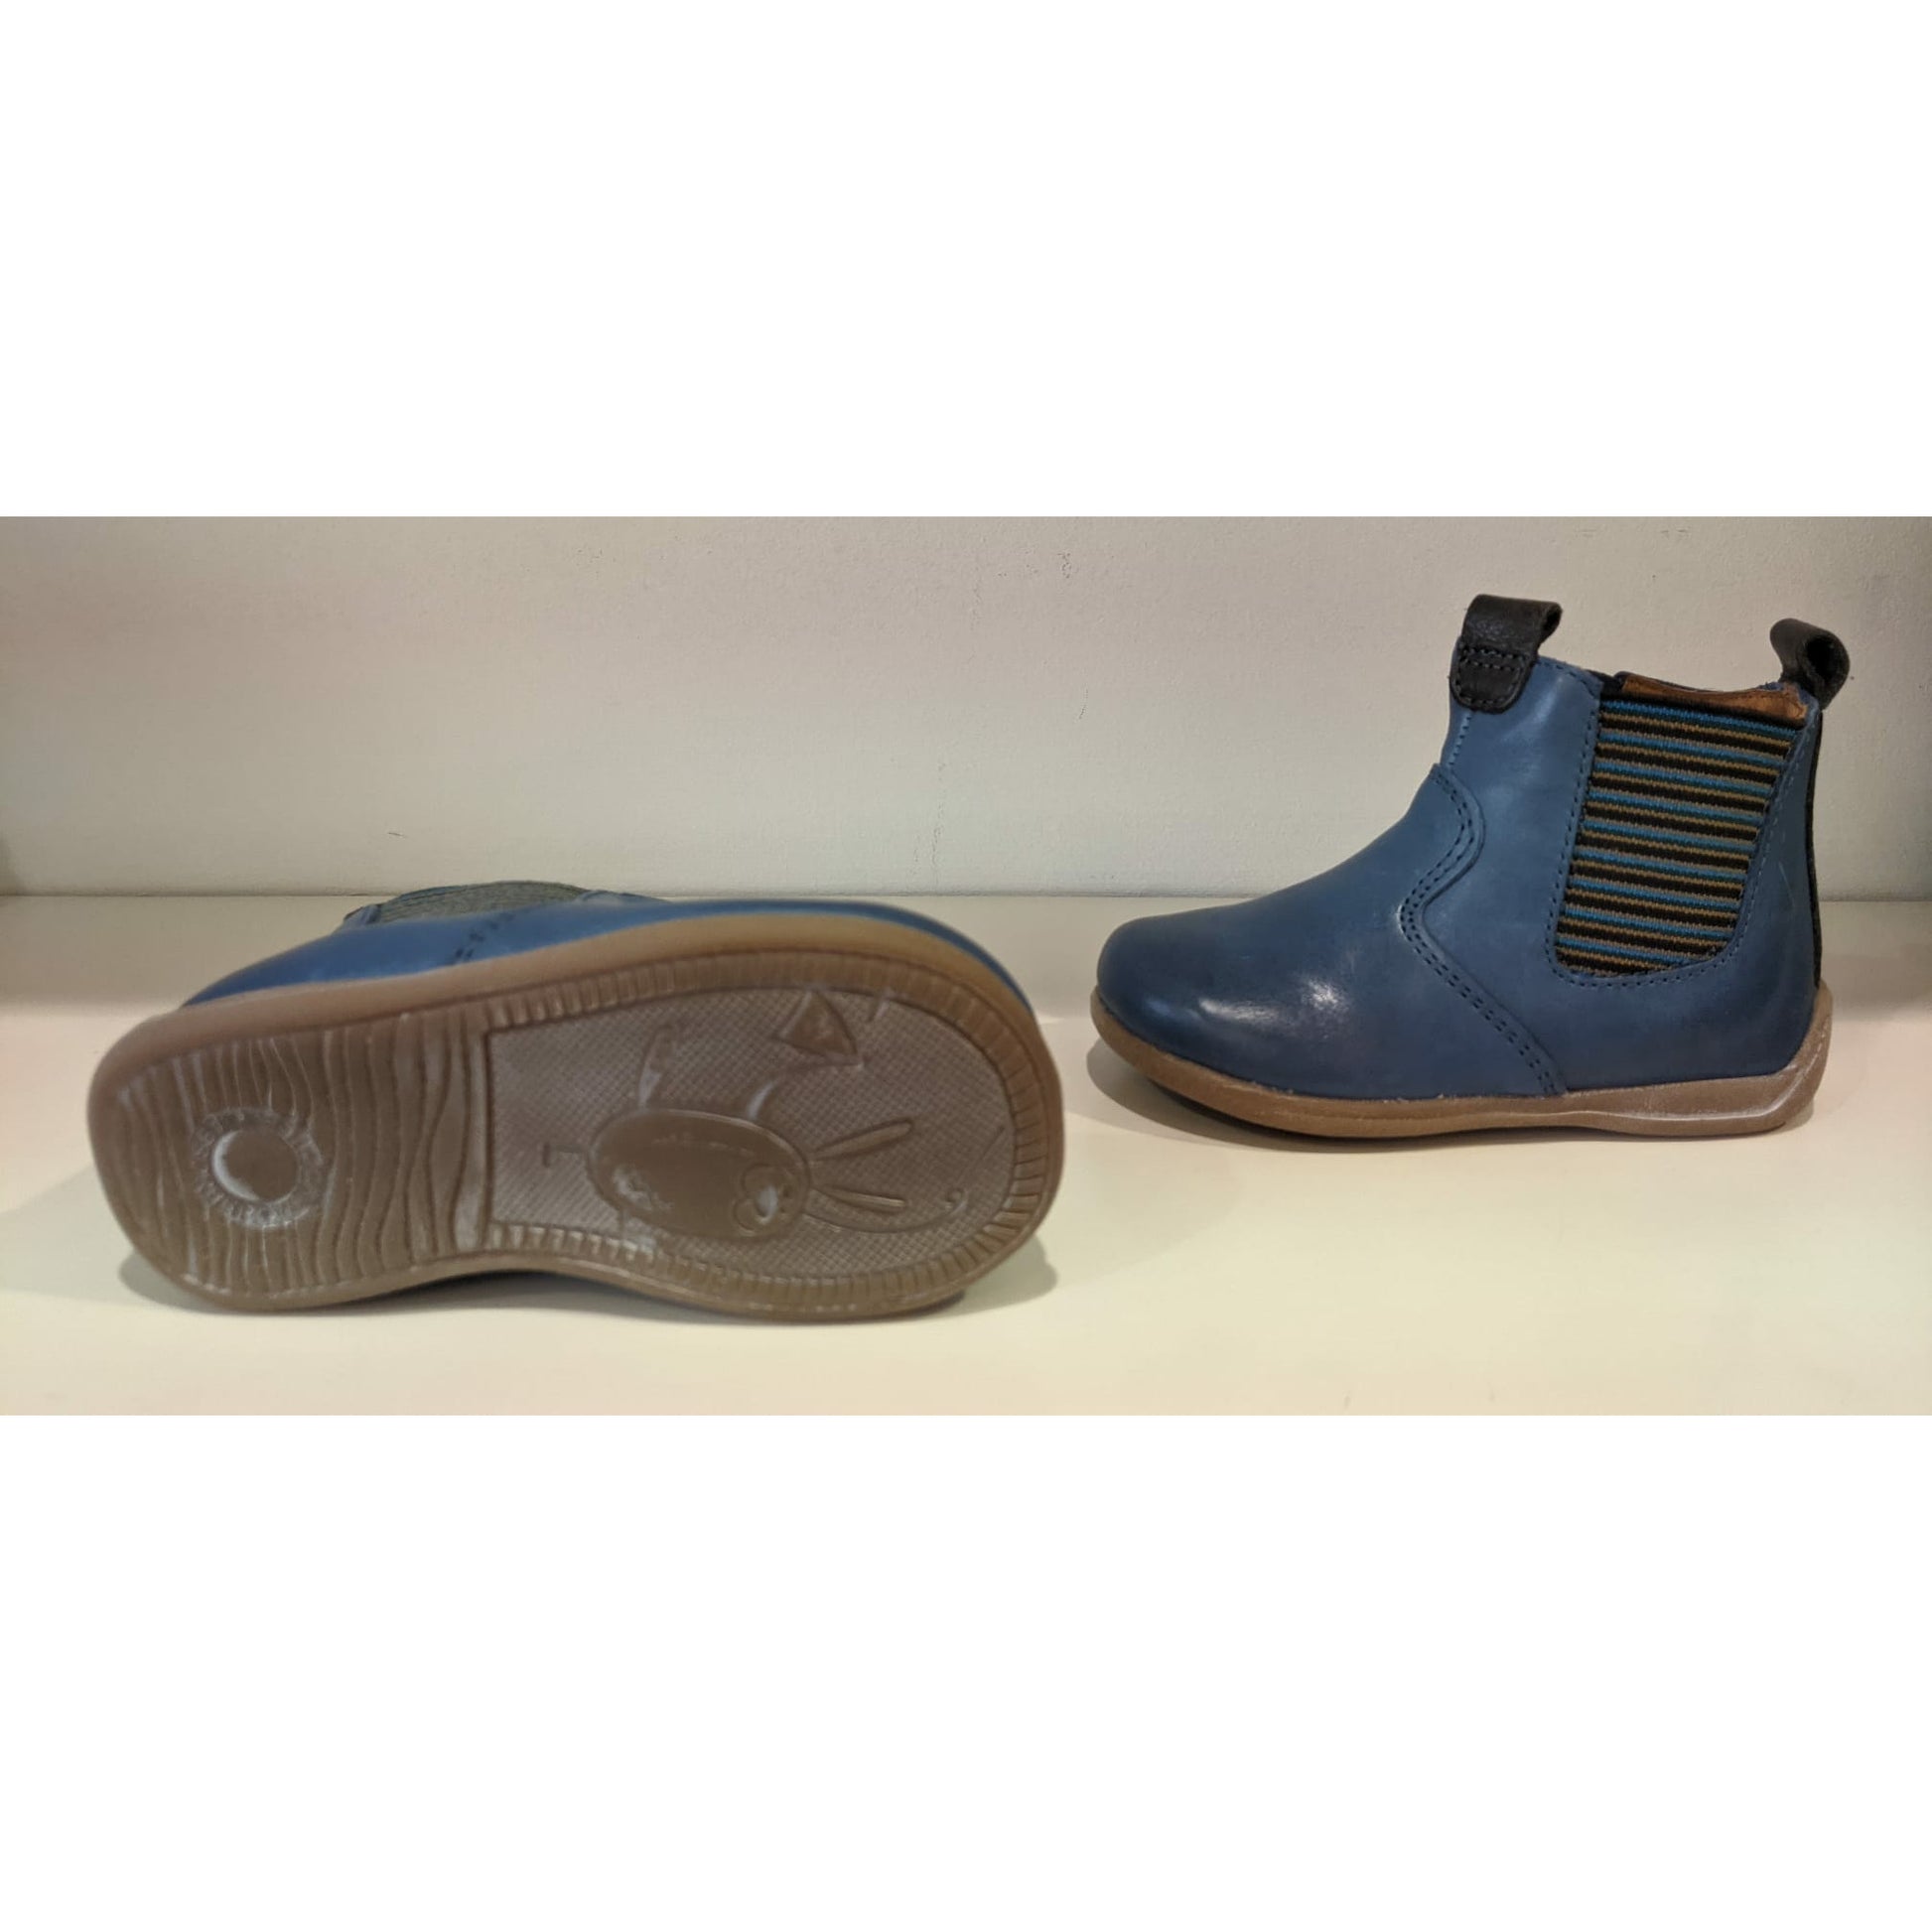 A boys ankle boot by Froddo, style G2160030-1, in blue leather with zip fastening. Sole and left side view.